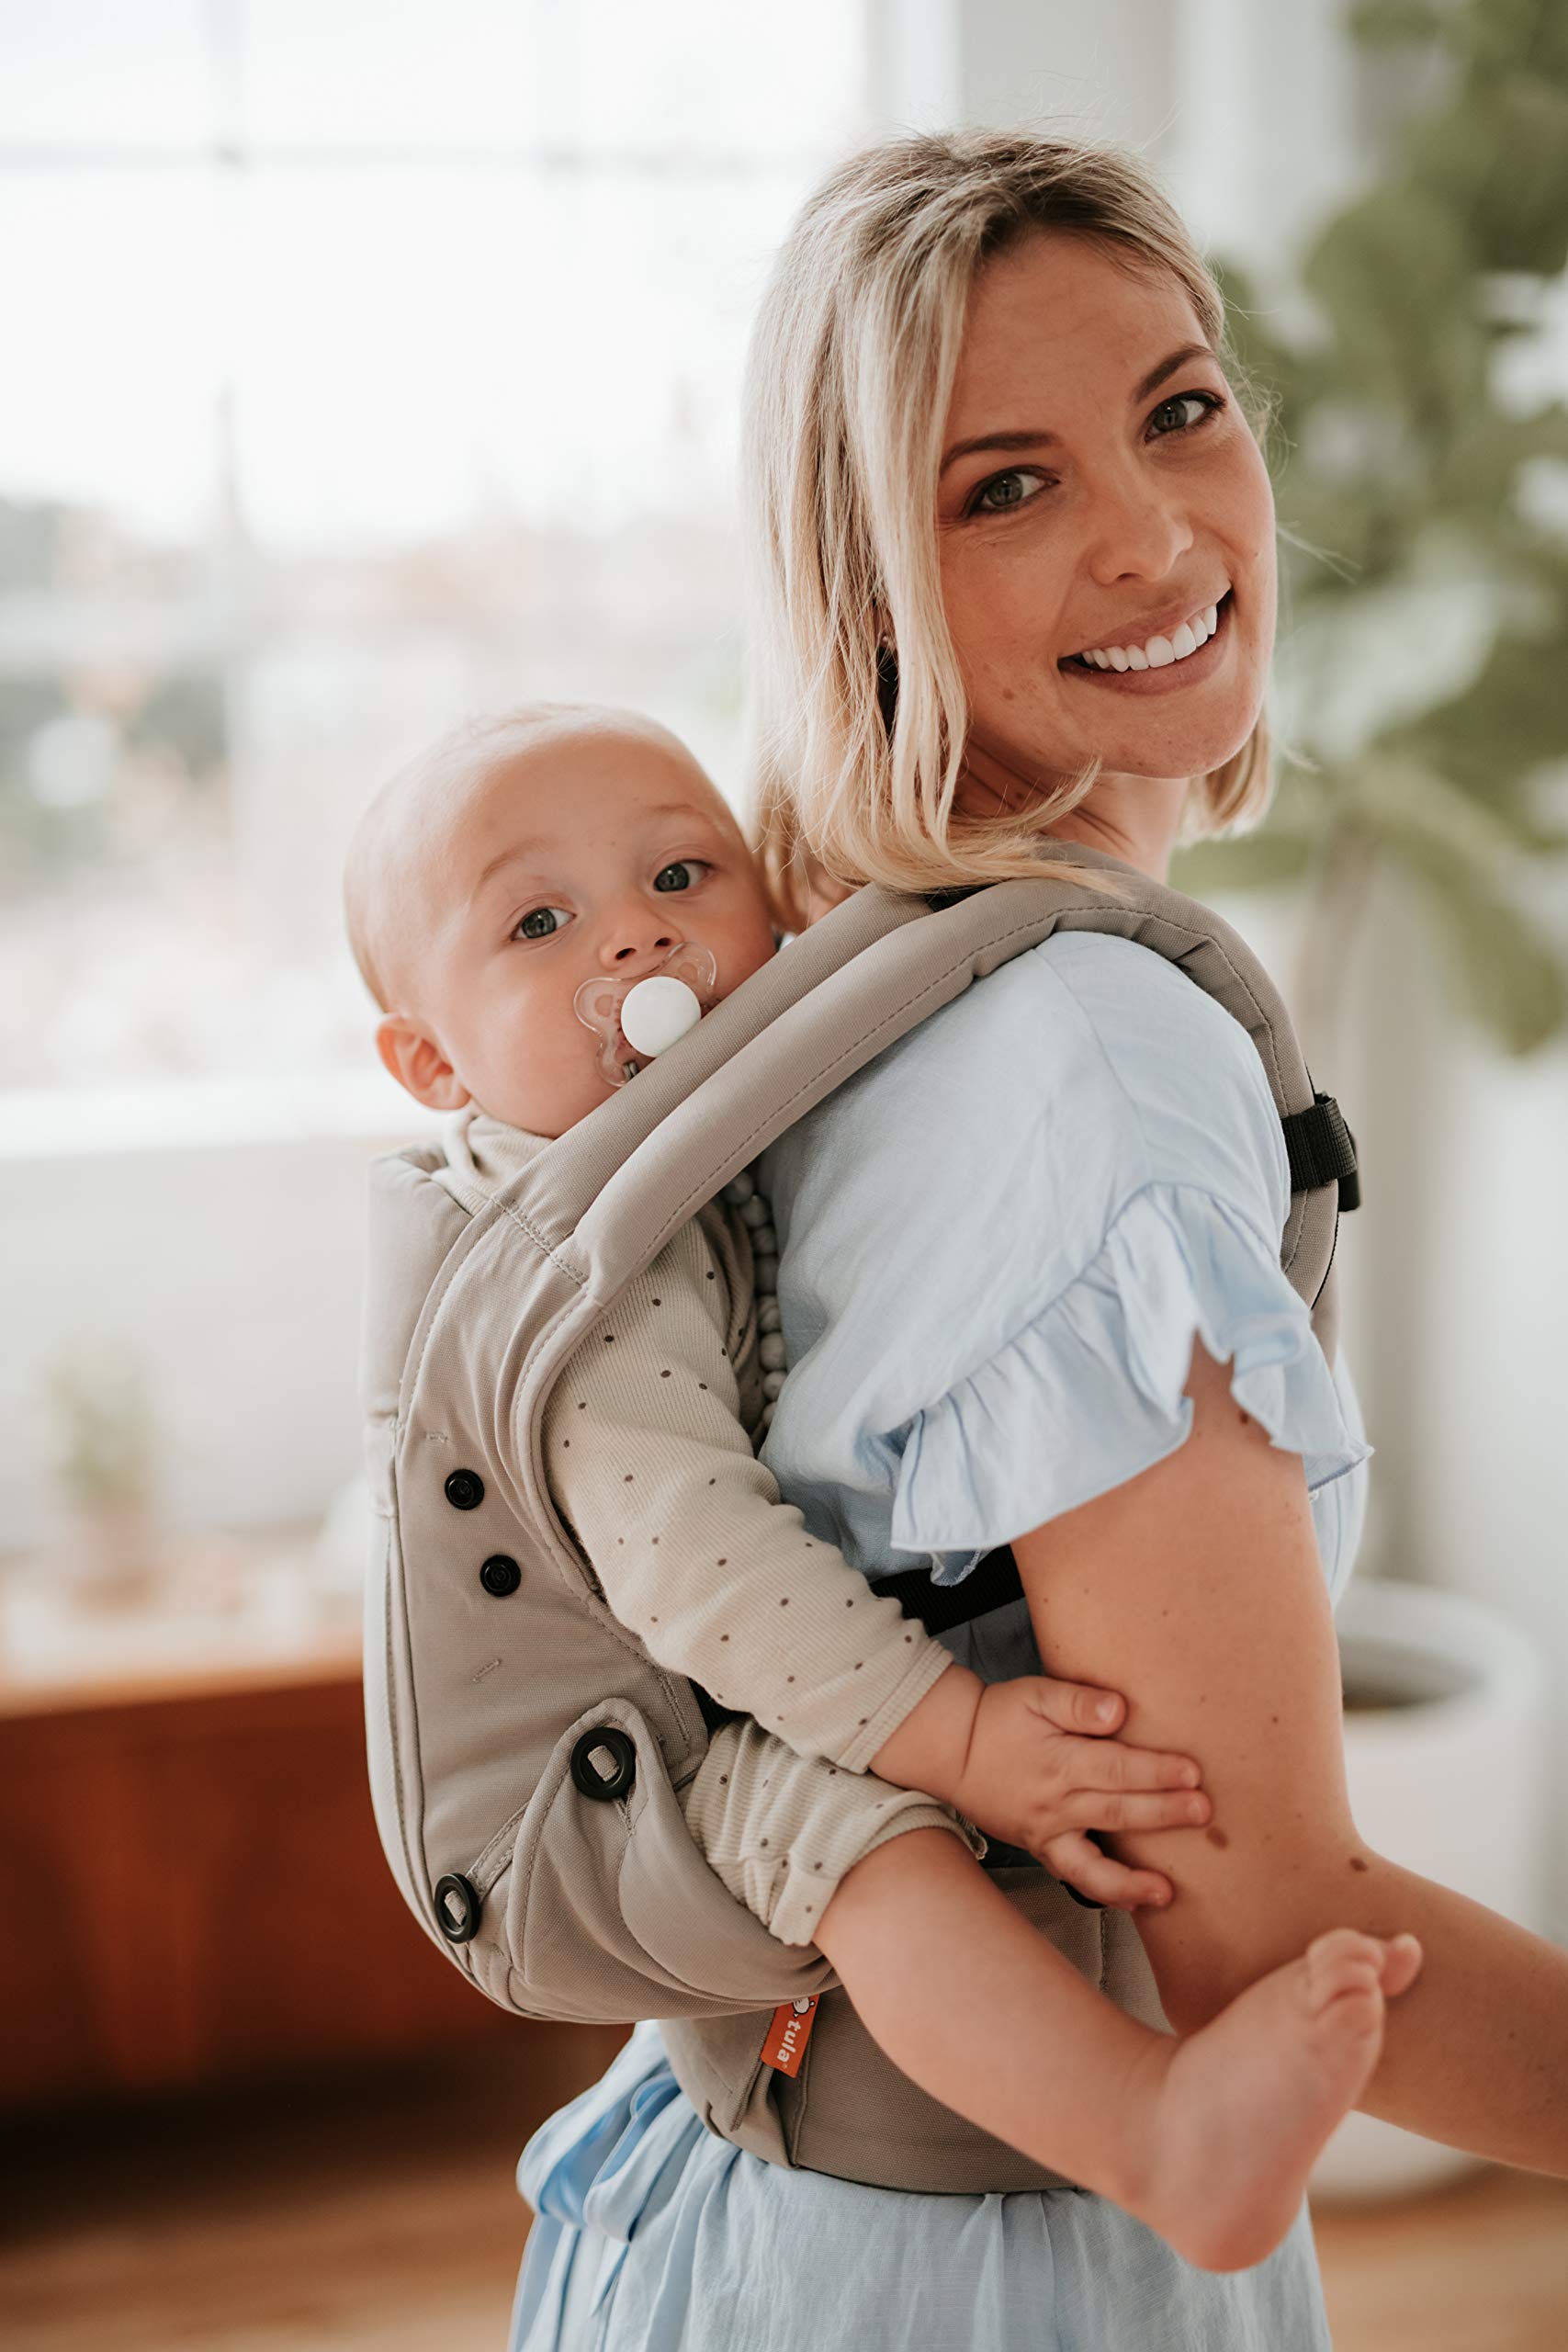 Baby Tula Coast Explore Mesh Baby Carrier 7 – 45 lb, Adjustable Newborn to Toddler Carrier, Multiple Ergonomic Positions Front and Back, Breathable – Coast Overcast, Light Gray with Light Gray Mesh